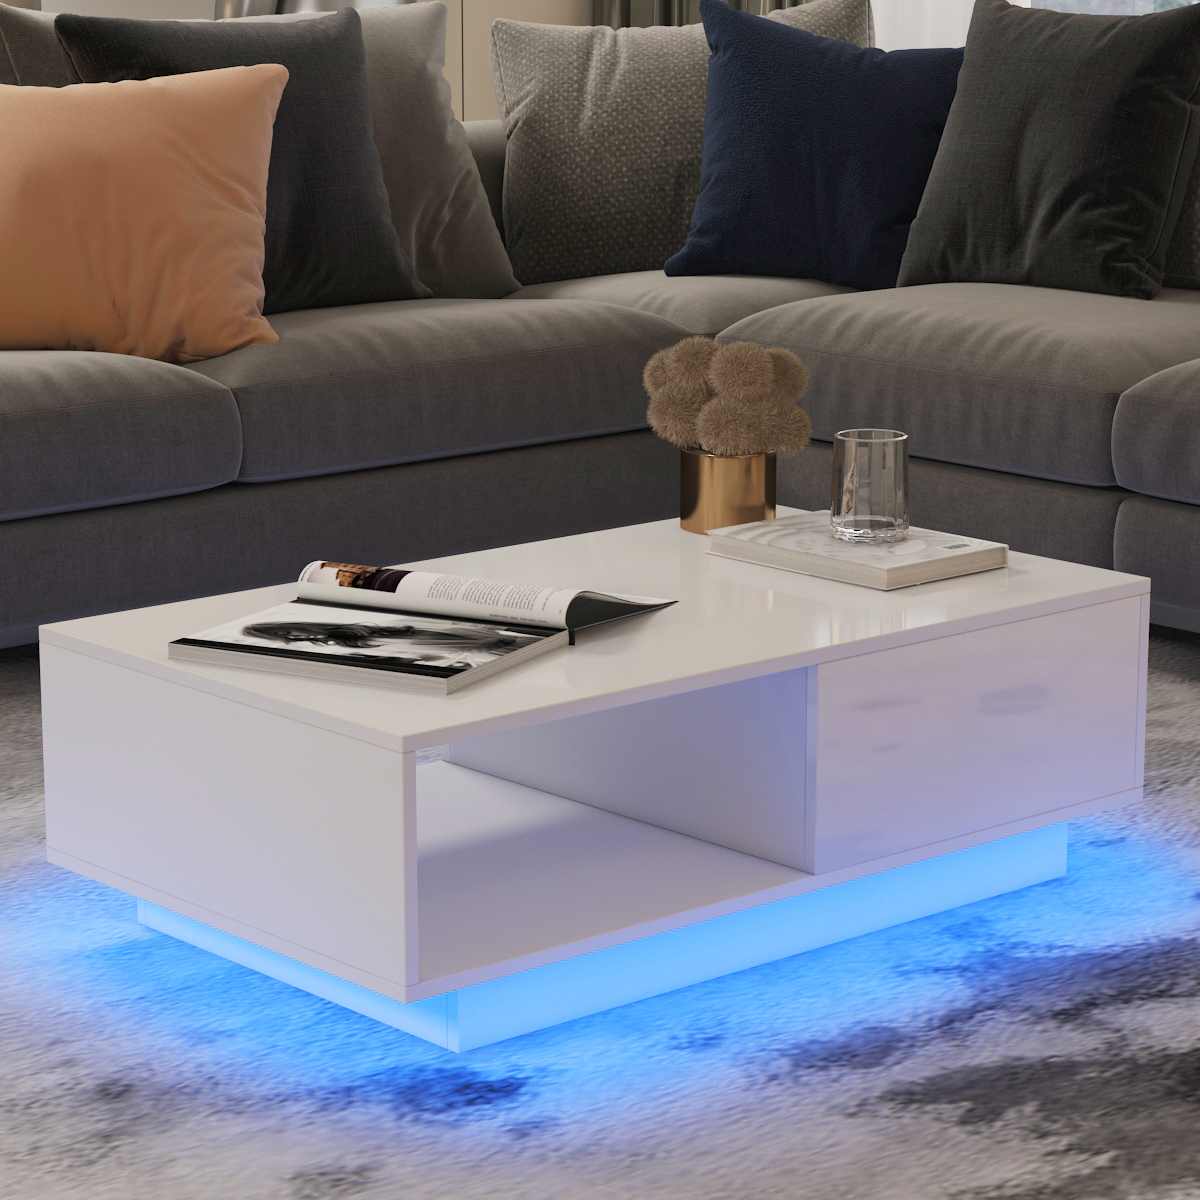 High Gloss Coffee Tables For Living Room